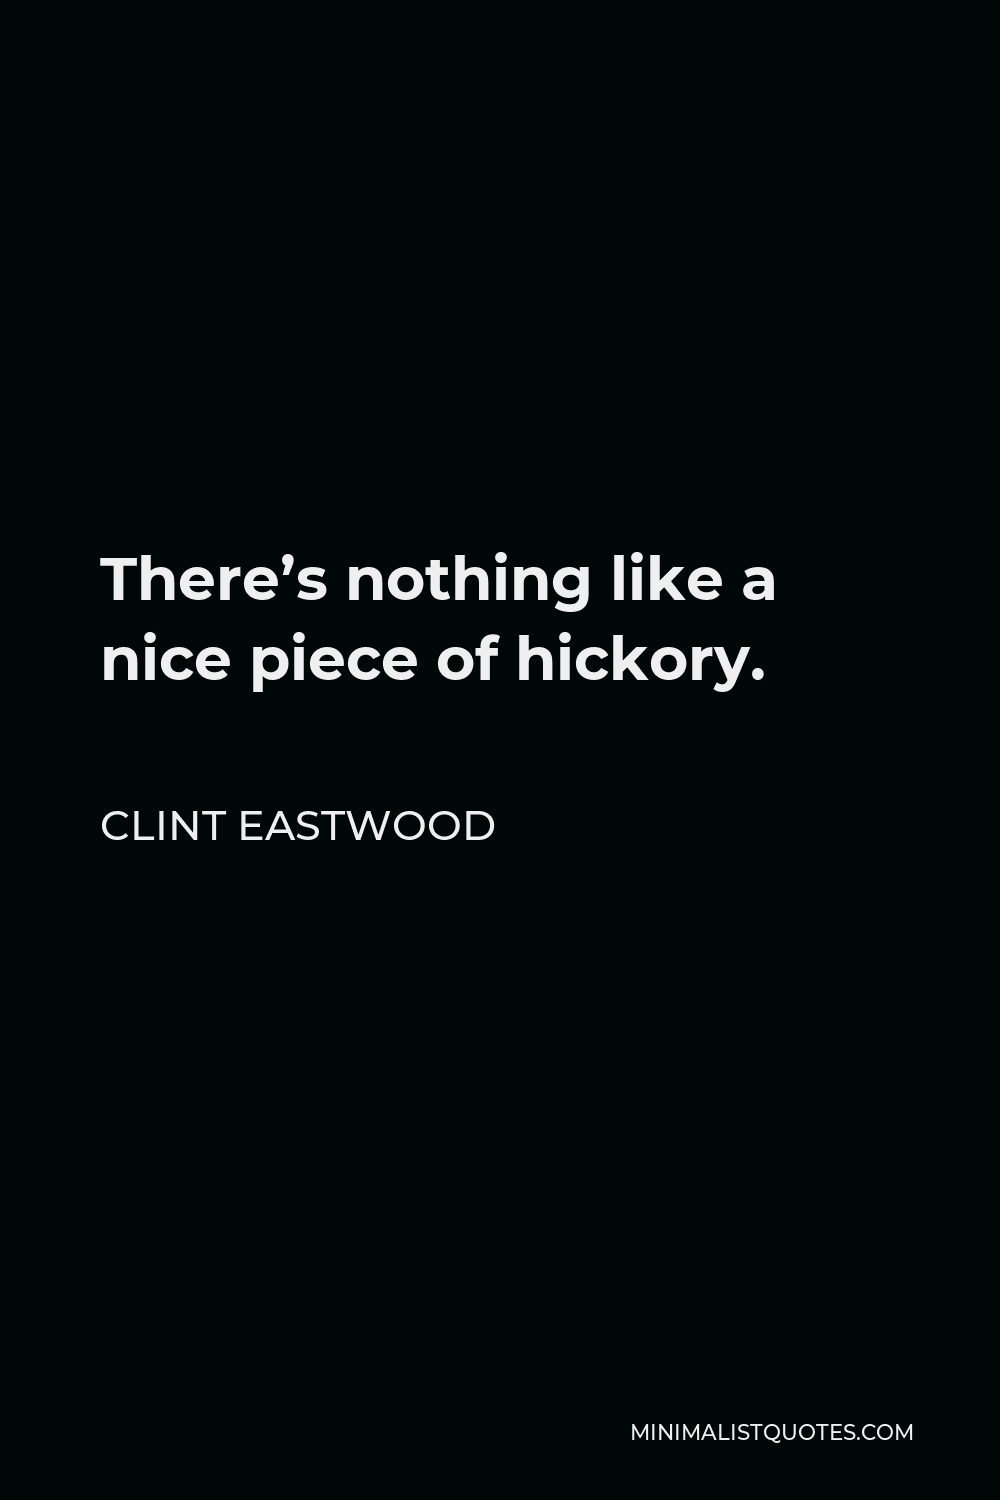 Clint Eastwood Quote - There’s nothing like a nice piece of hickory.